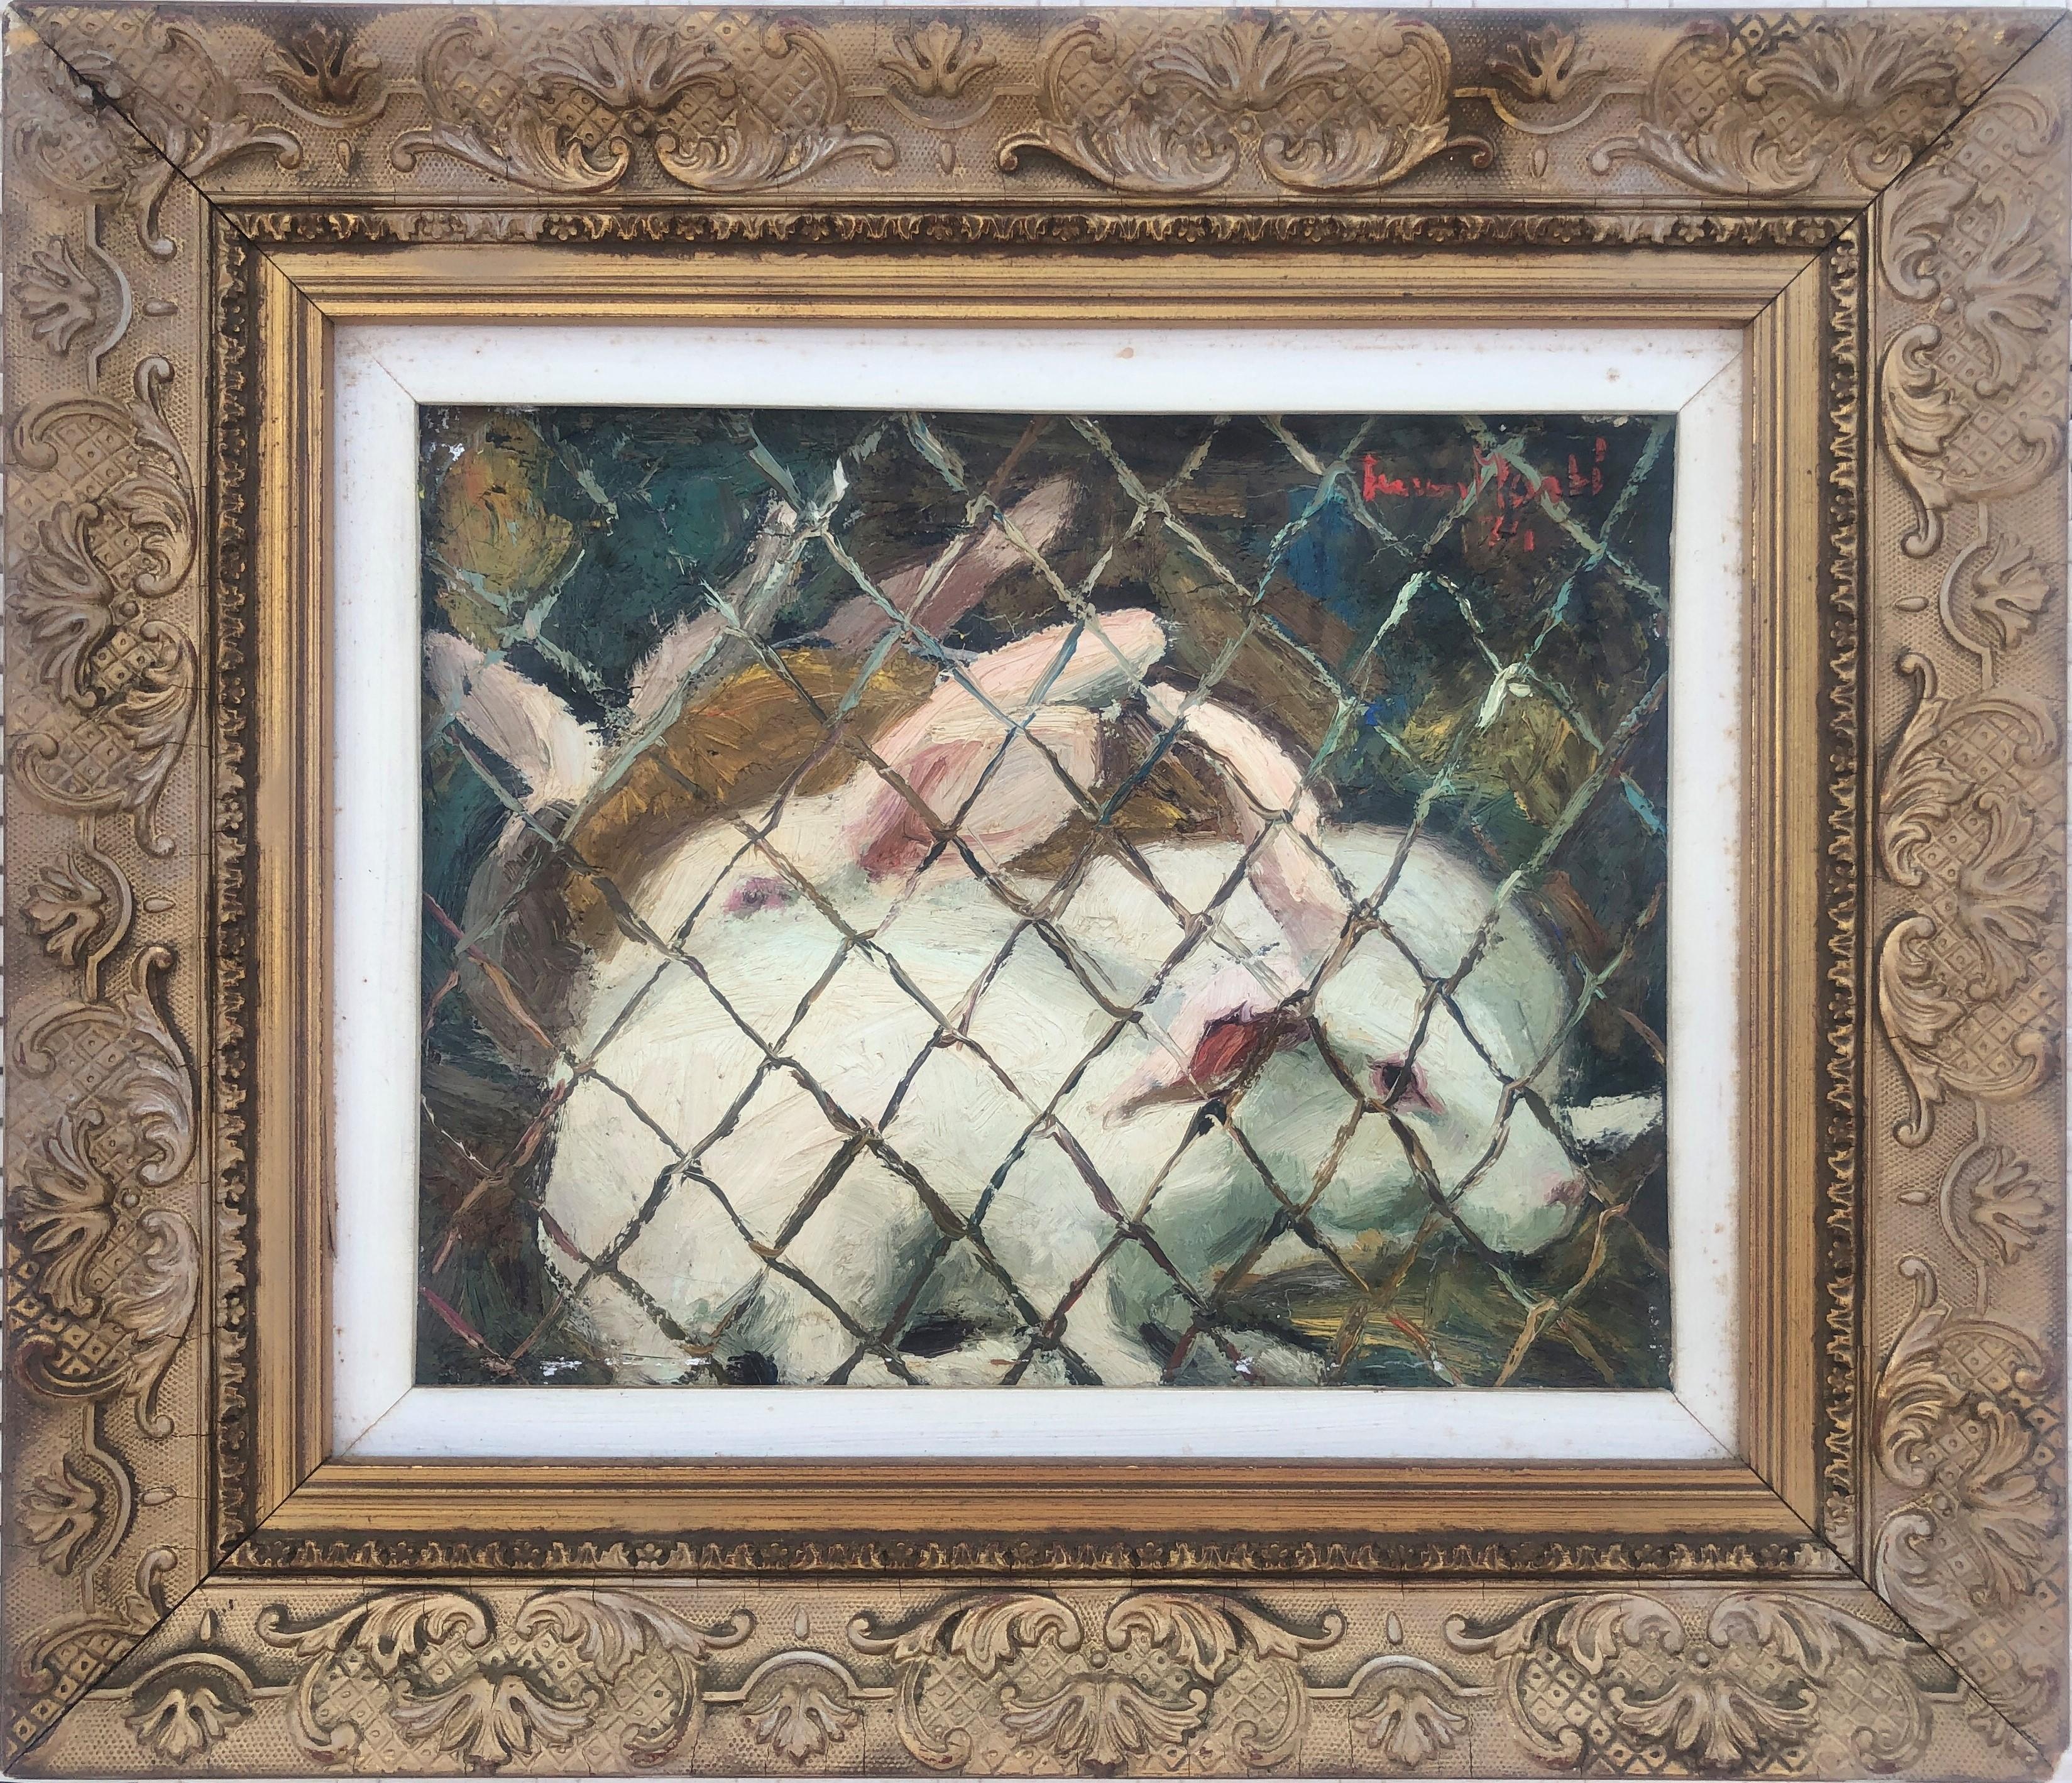 caged rabbits scene with animals oil on canvas painting - Painting by Ferran Marti